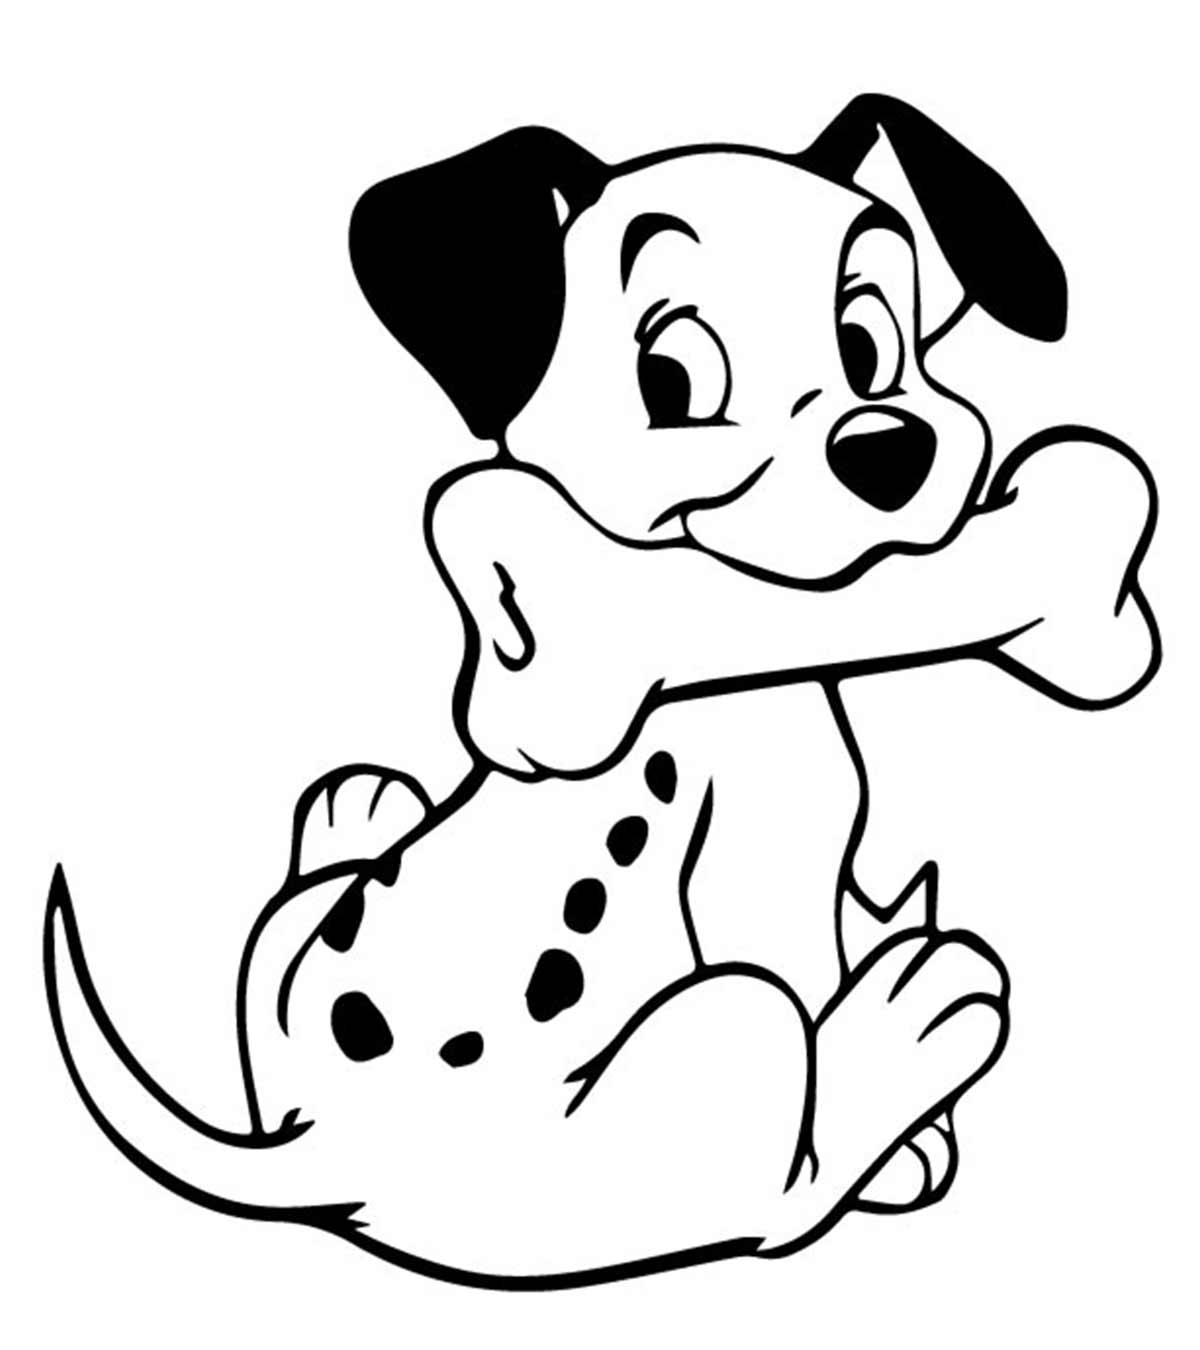 10 Best "101 Dalmatians" Coloring Pages For Your Little One_image